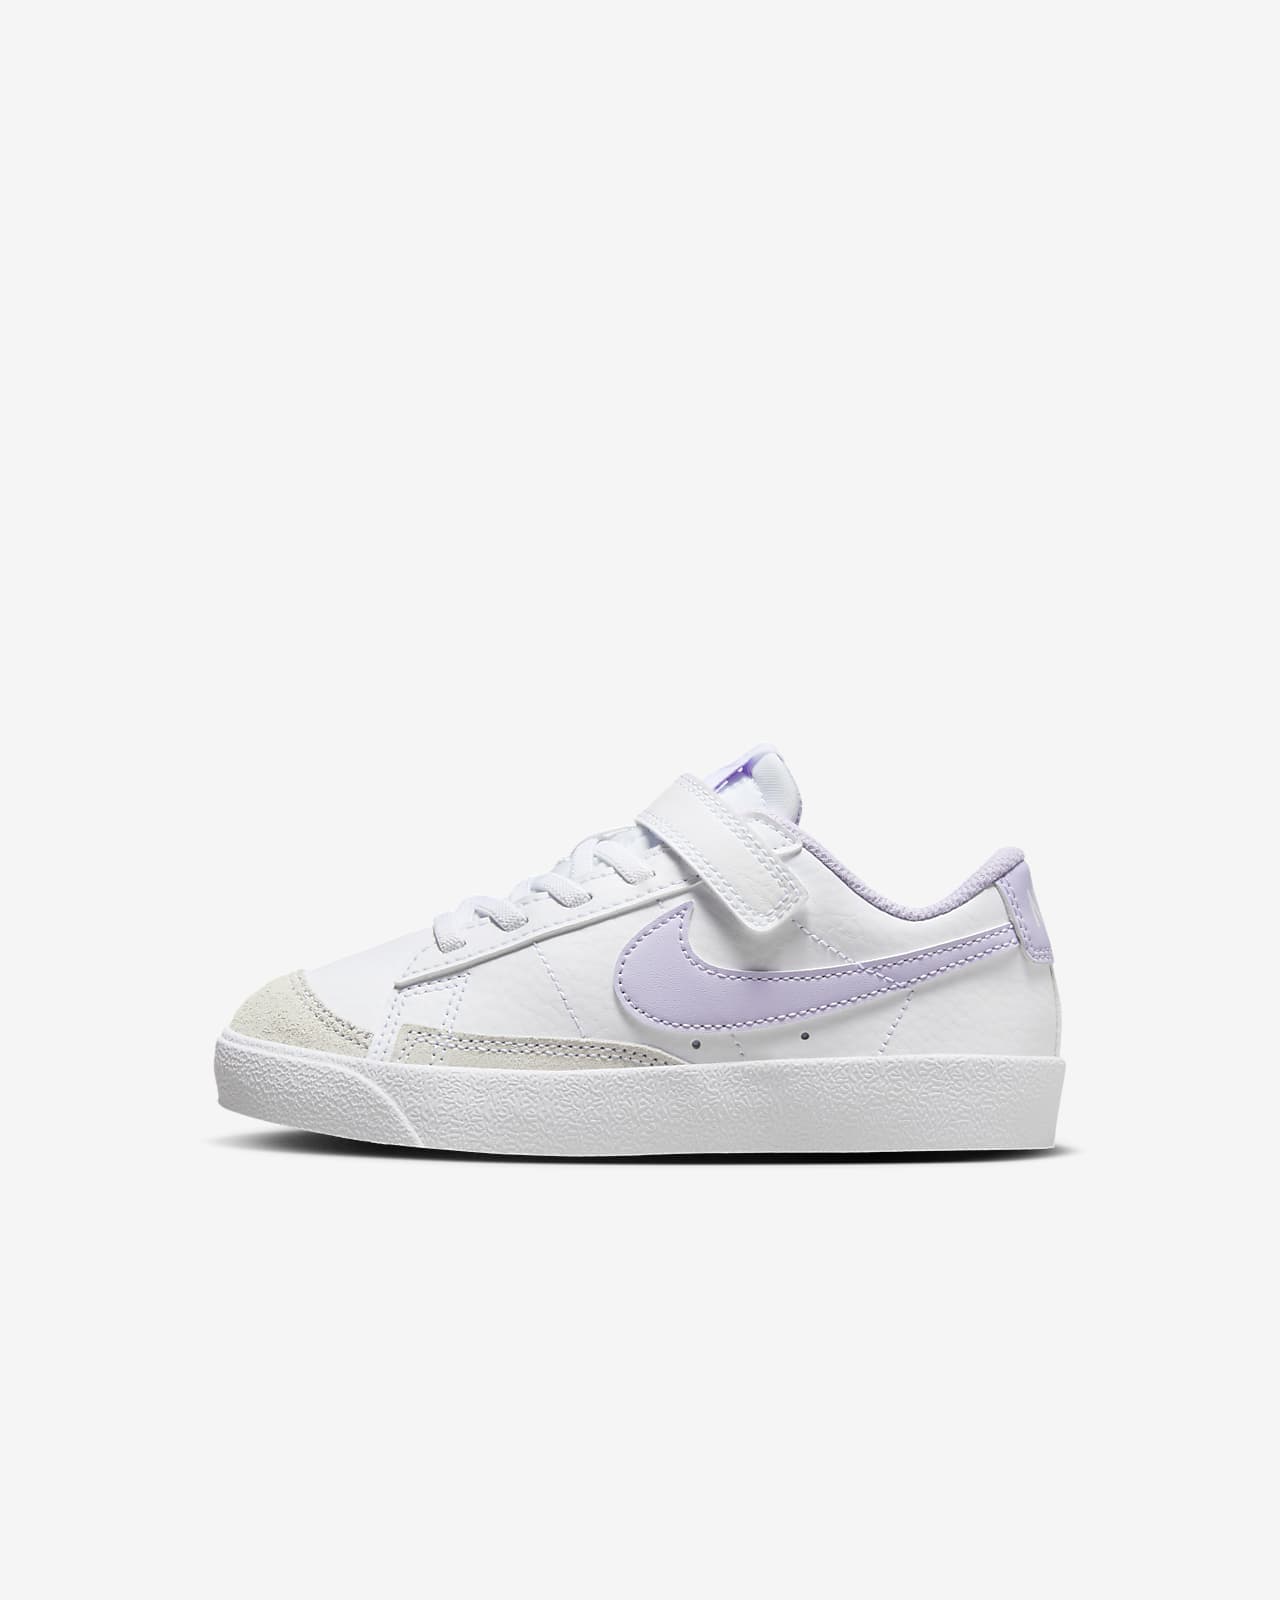 Nike Blazer Low '77 Younger Kids' Shoes